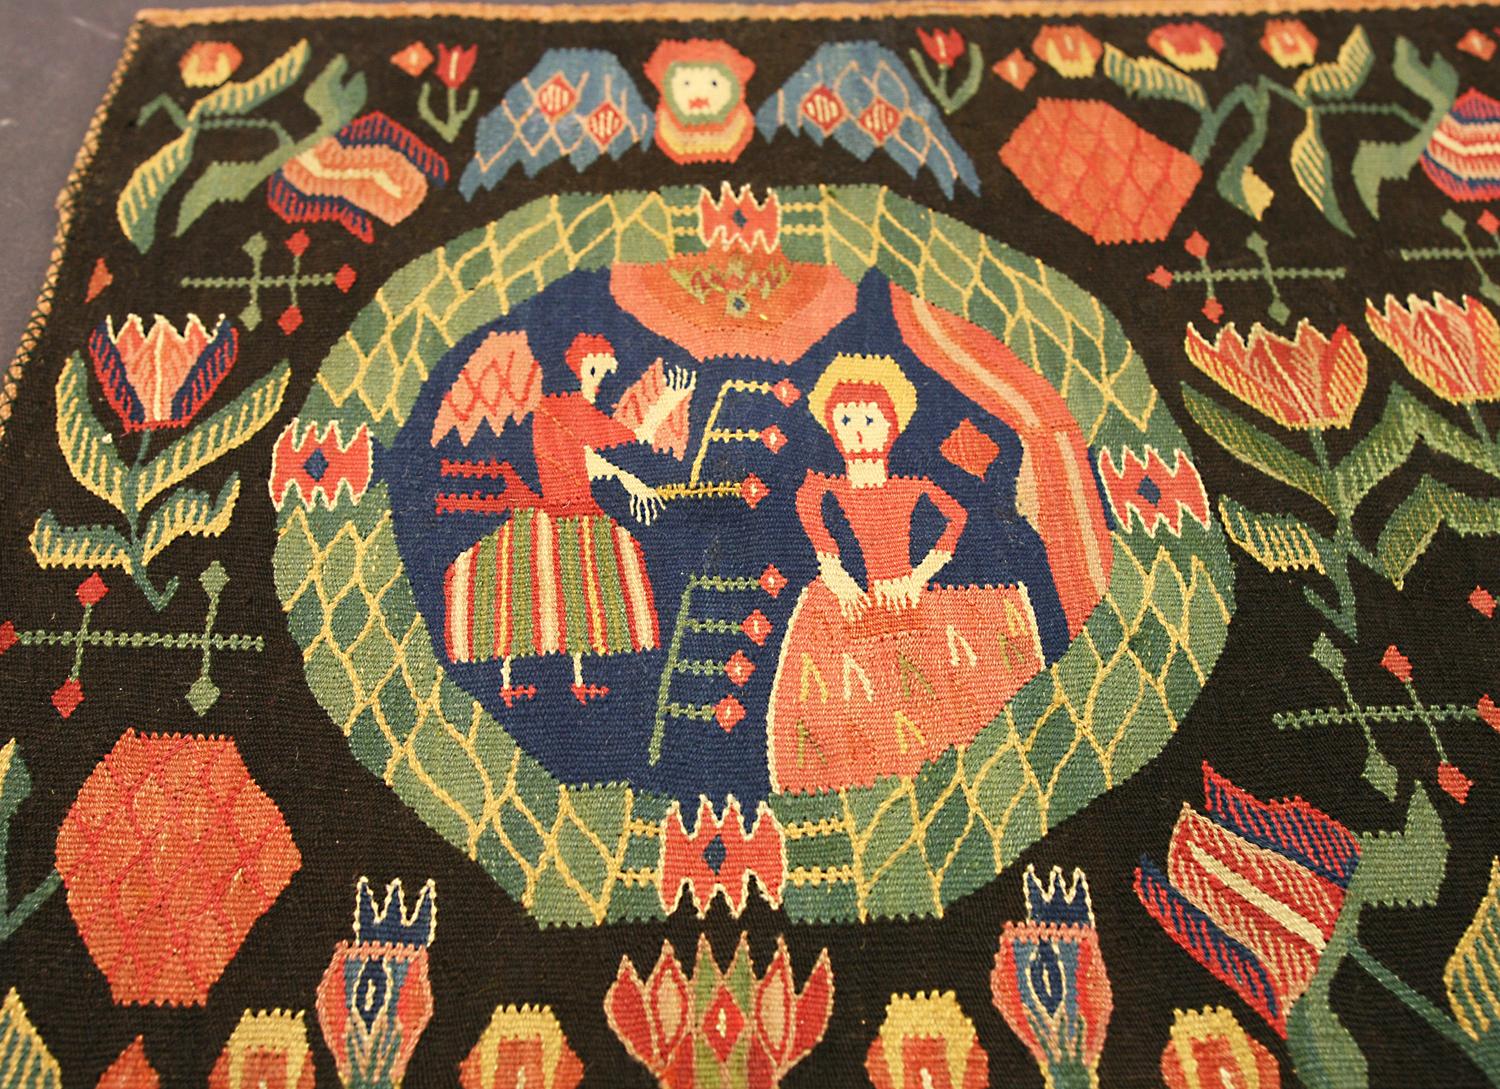 Tan France auction Pick

This is an antique Swedish textile woven during the 19th century that measures 96 x 51CM in size. this textile has a horizontal format with a pictorial design of a lady being greeted by an Angel with wings enclosed Within a